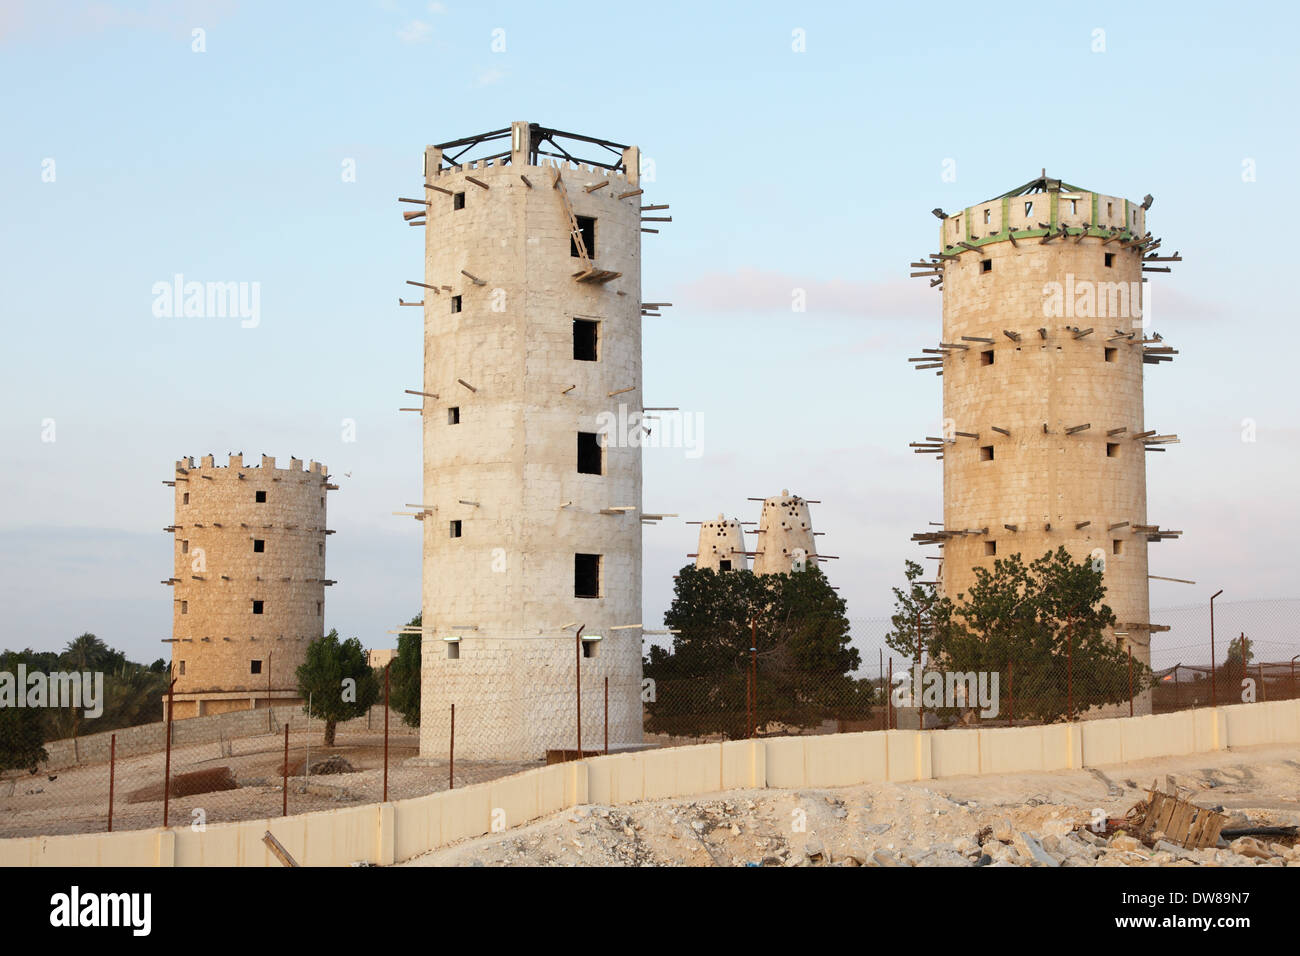 The bird towers in Qatar, Middle East Stock Photo